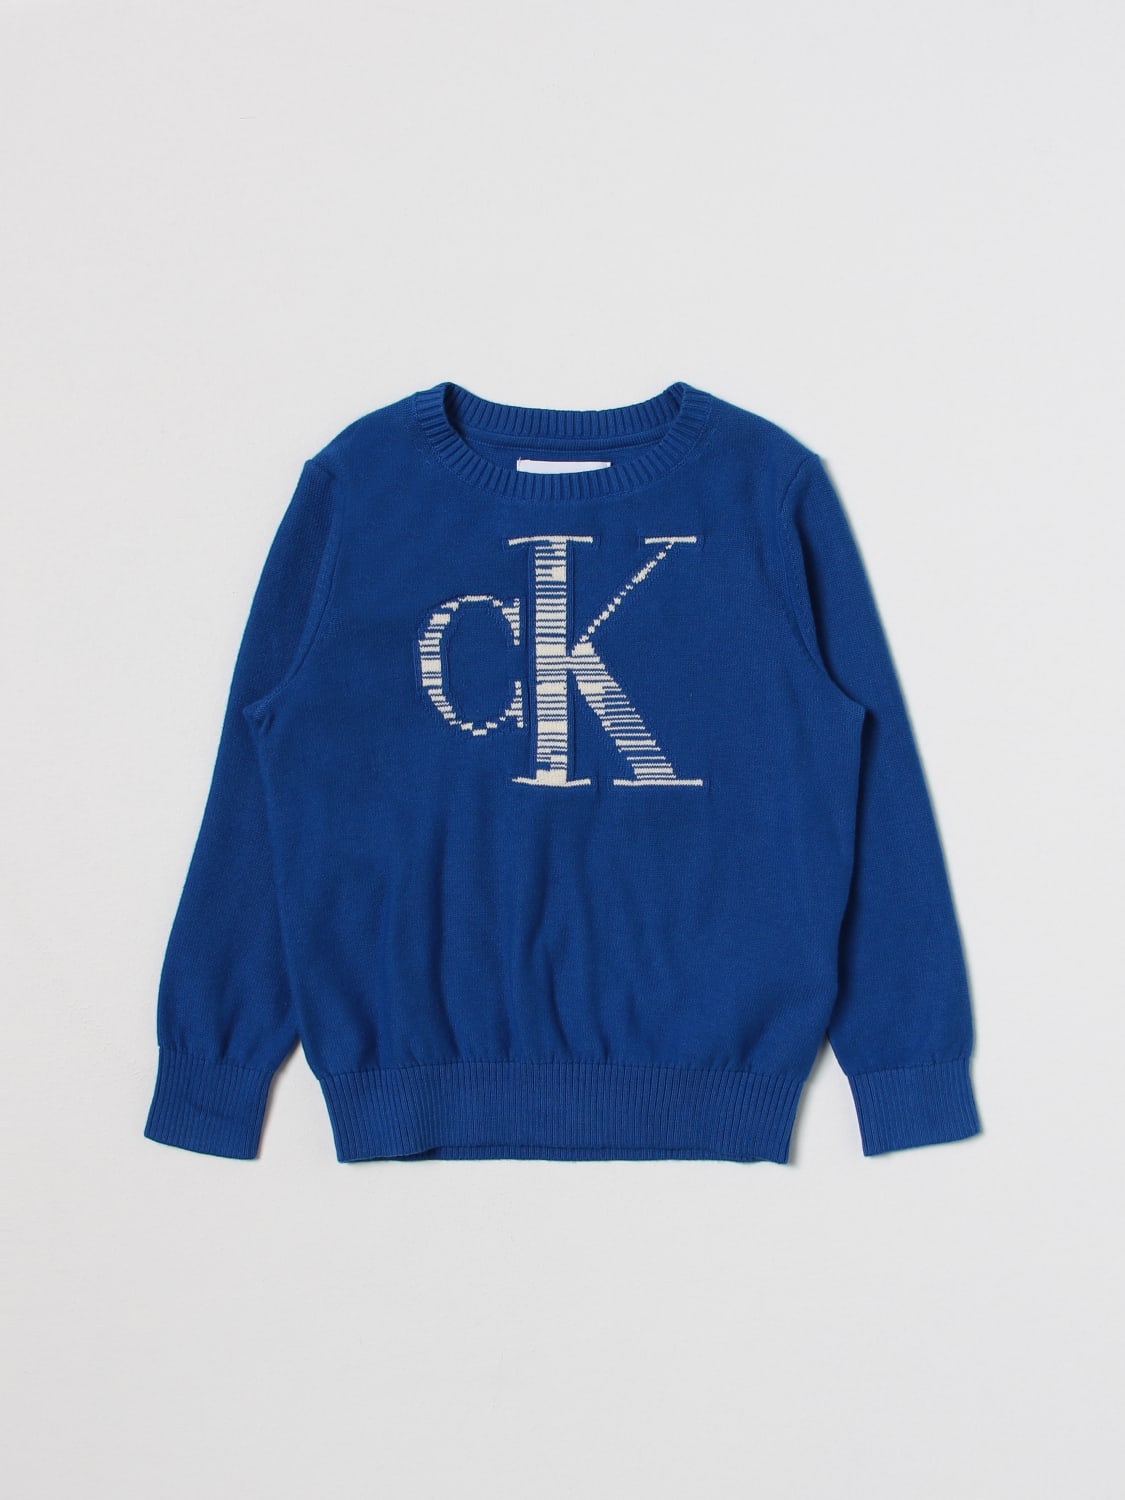 CALVIN KLEIN JEANS: sweater for boys - Blue Calvin Klein Jeans sweater IB0IB01580 at GIGLIO.COM